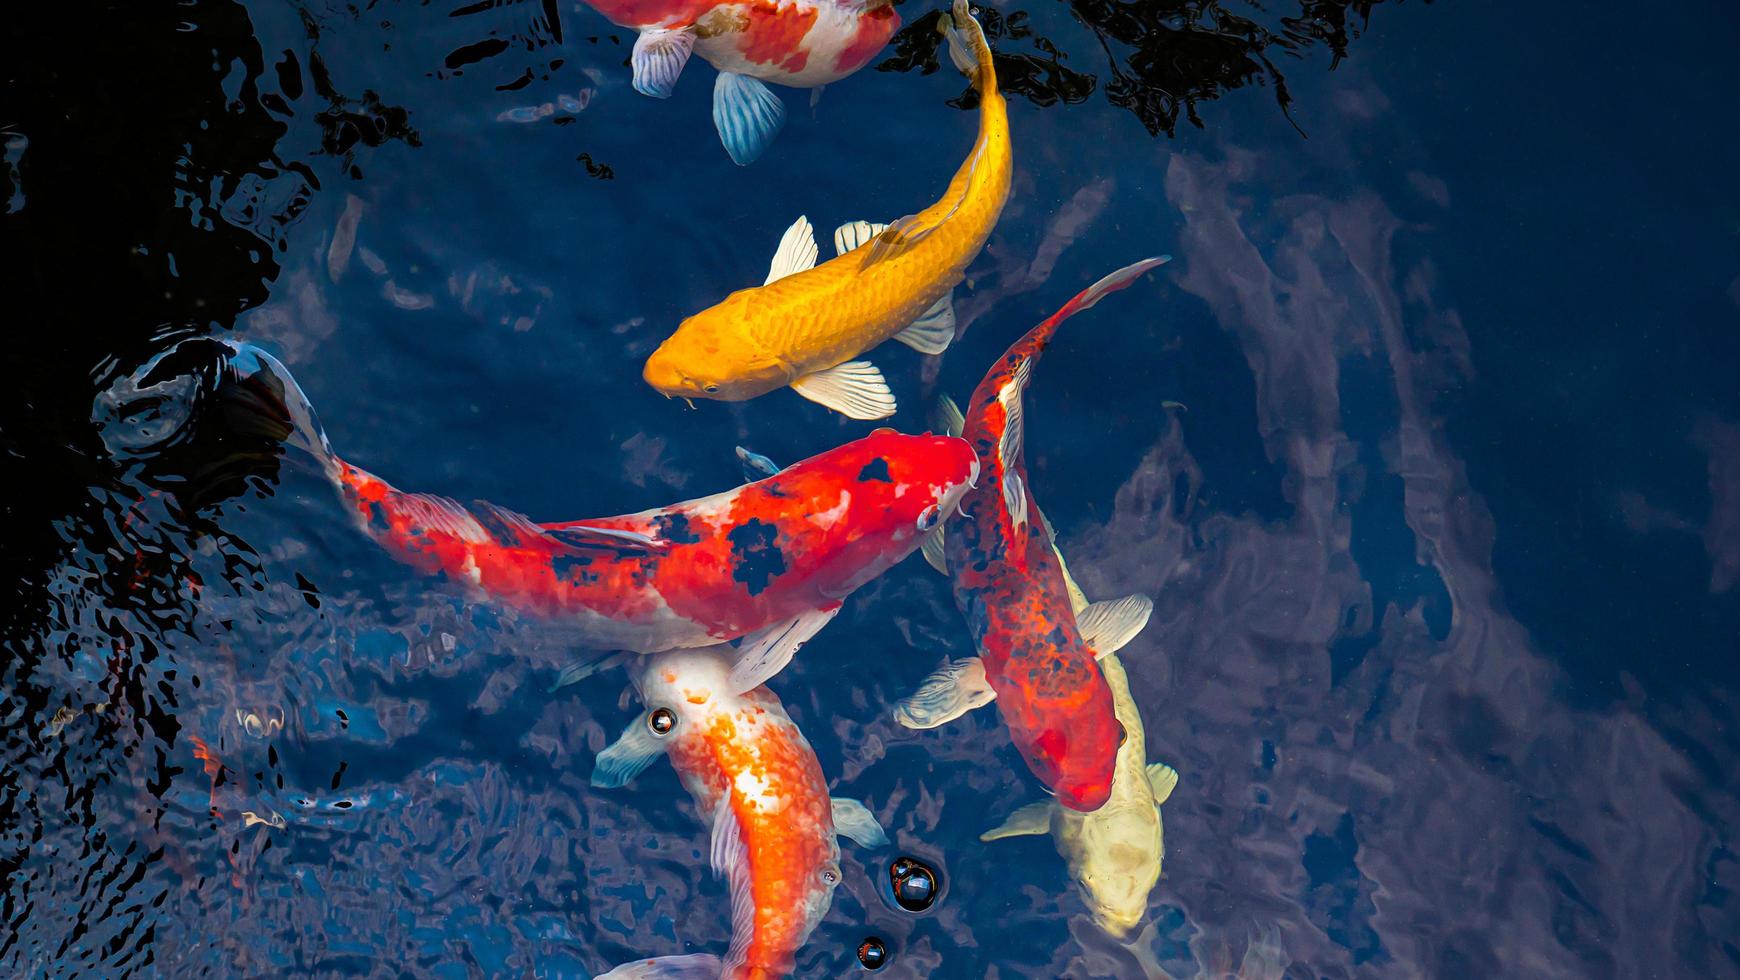 Japan koi fish or Fancy Carp swimming in a black pond fish pond. Popular pets for